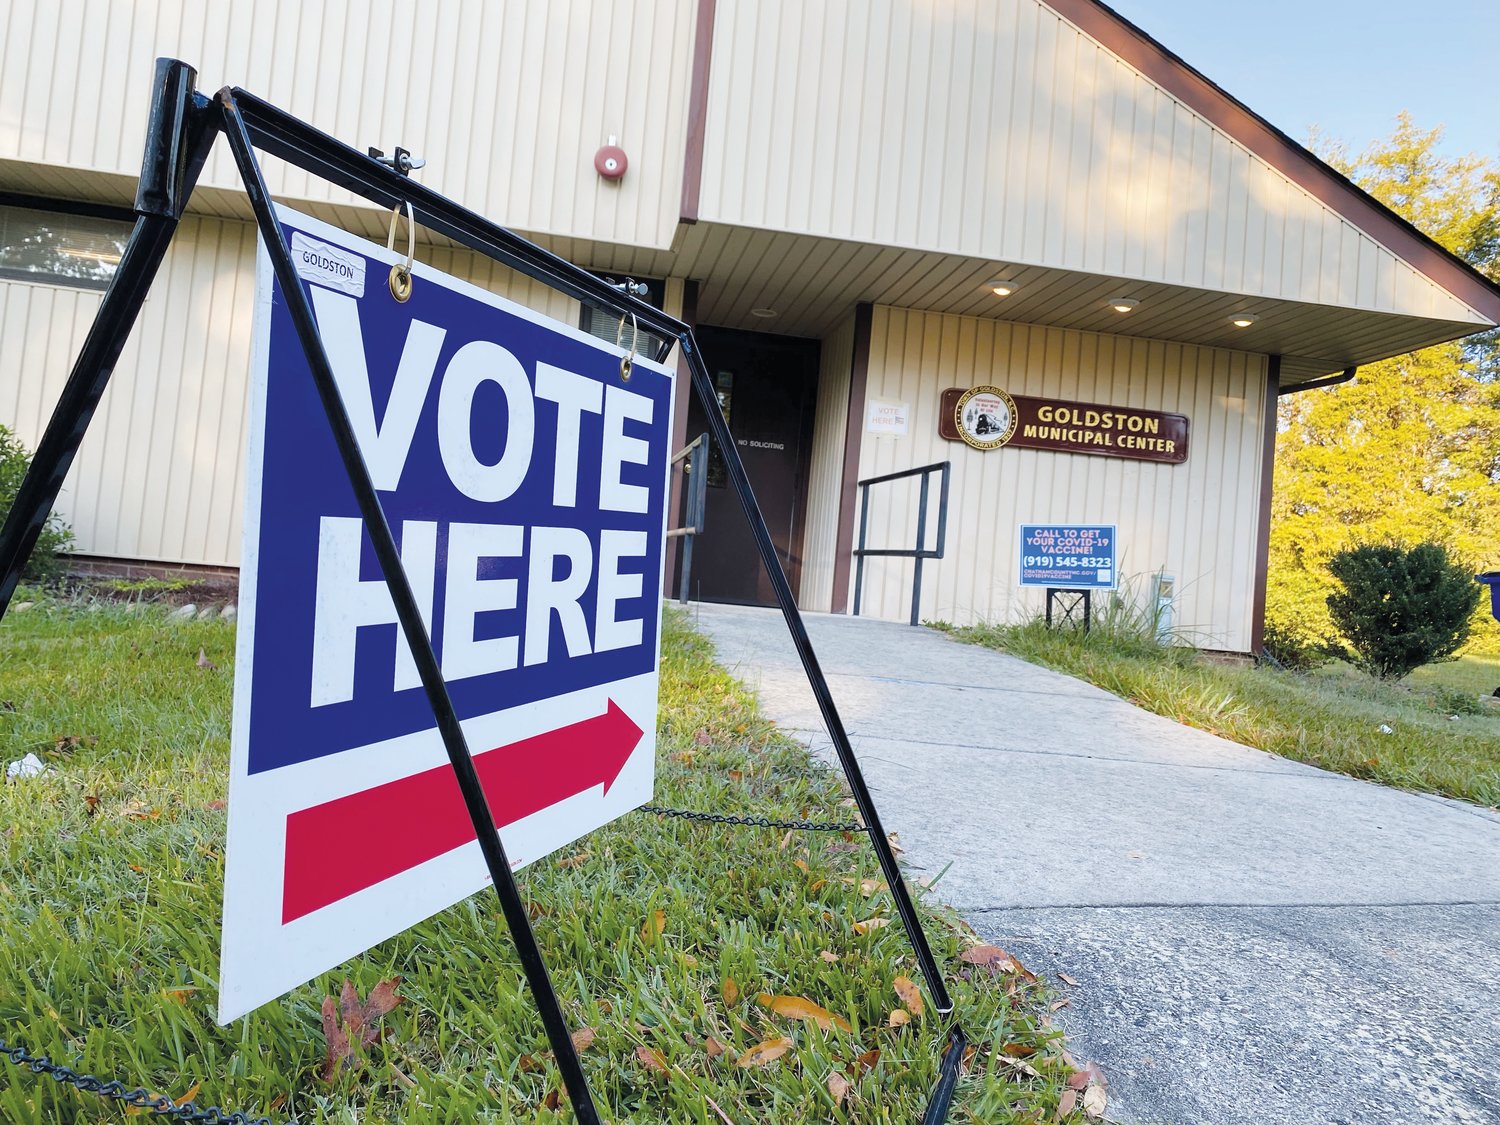 An early voting location in Goldston from the 2021 election season.